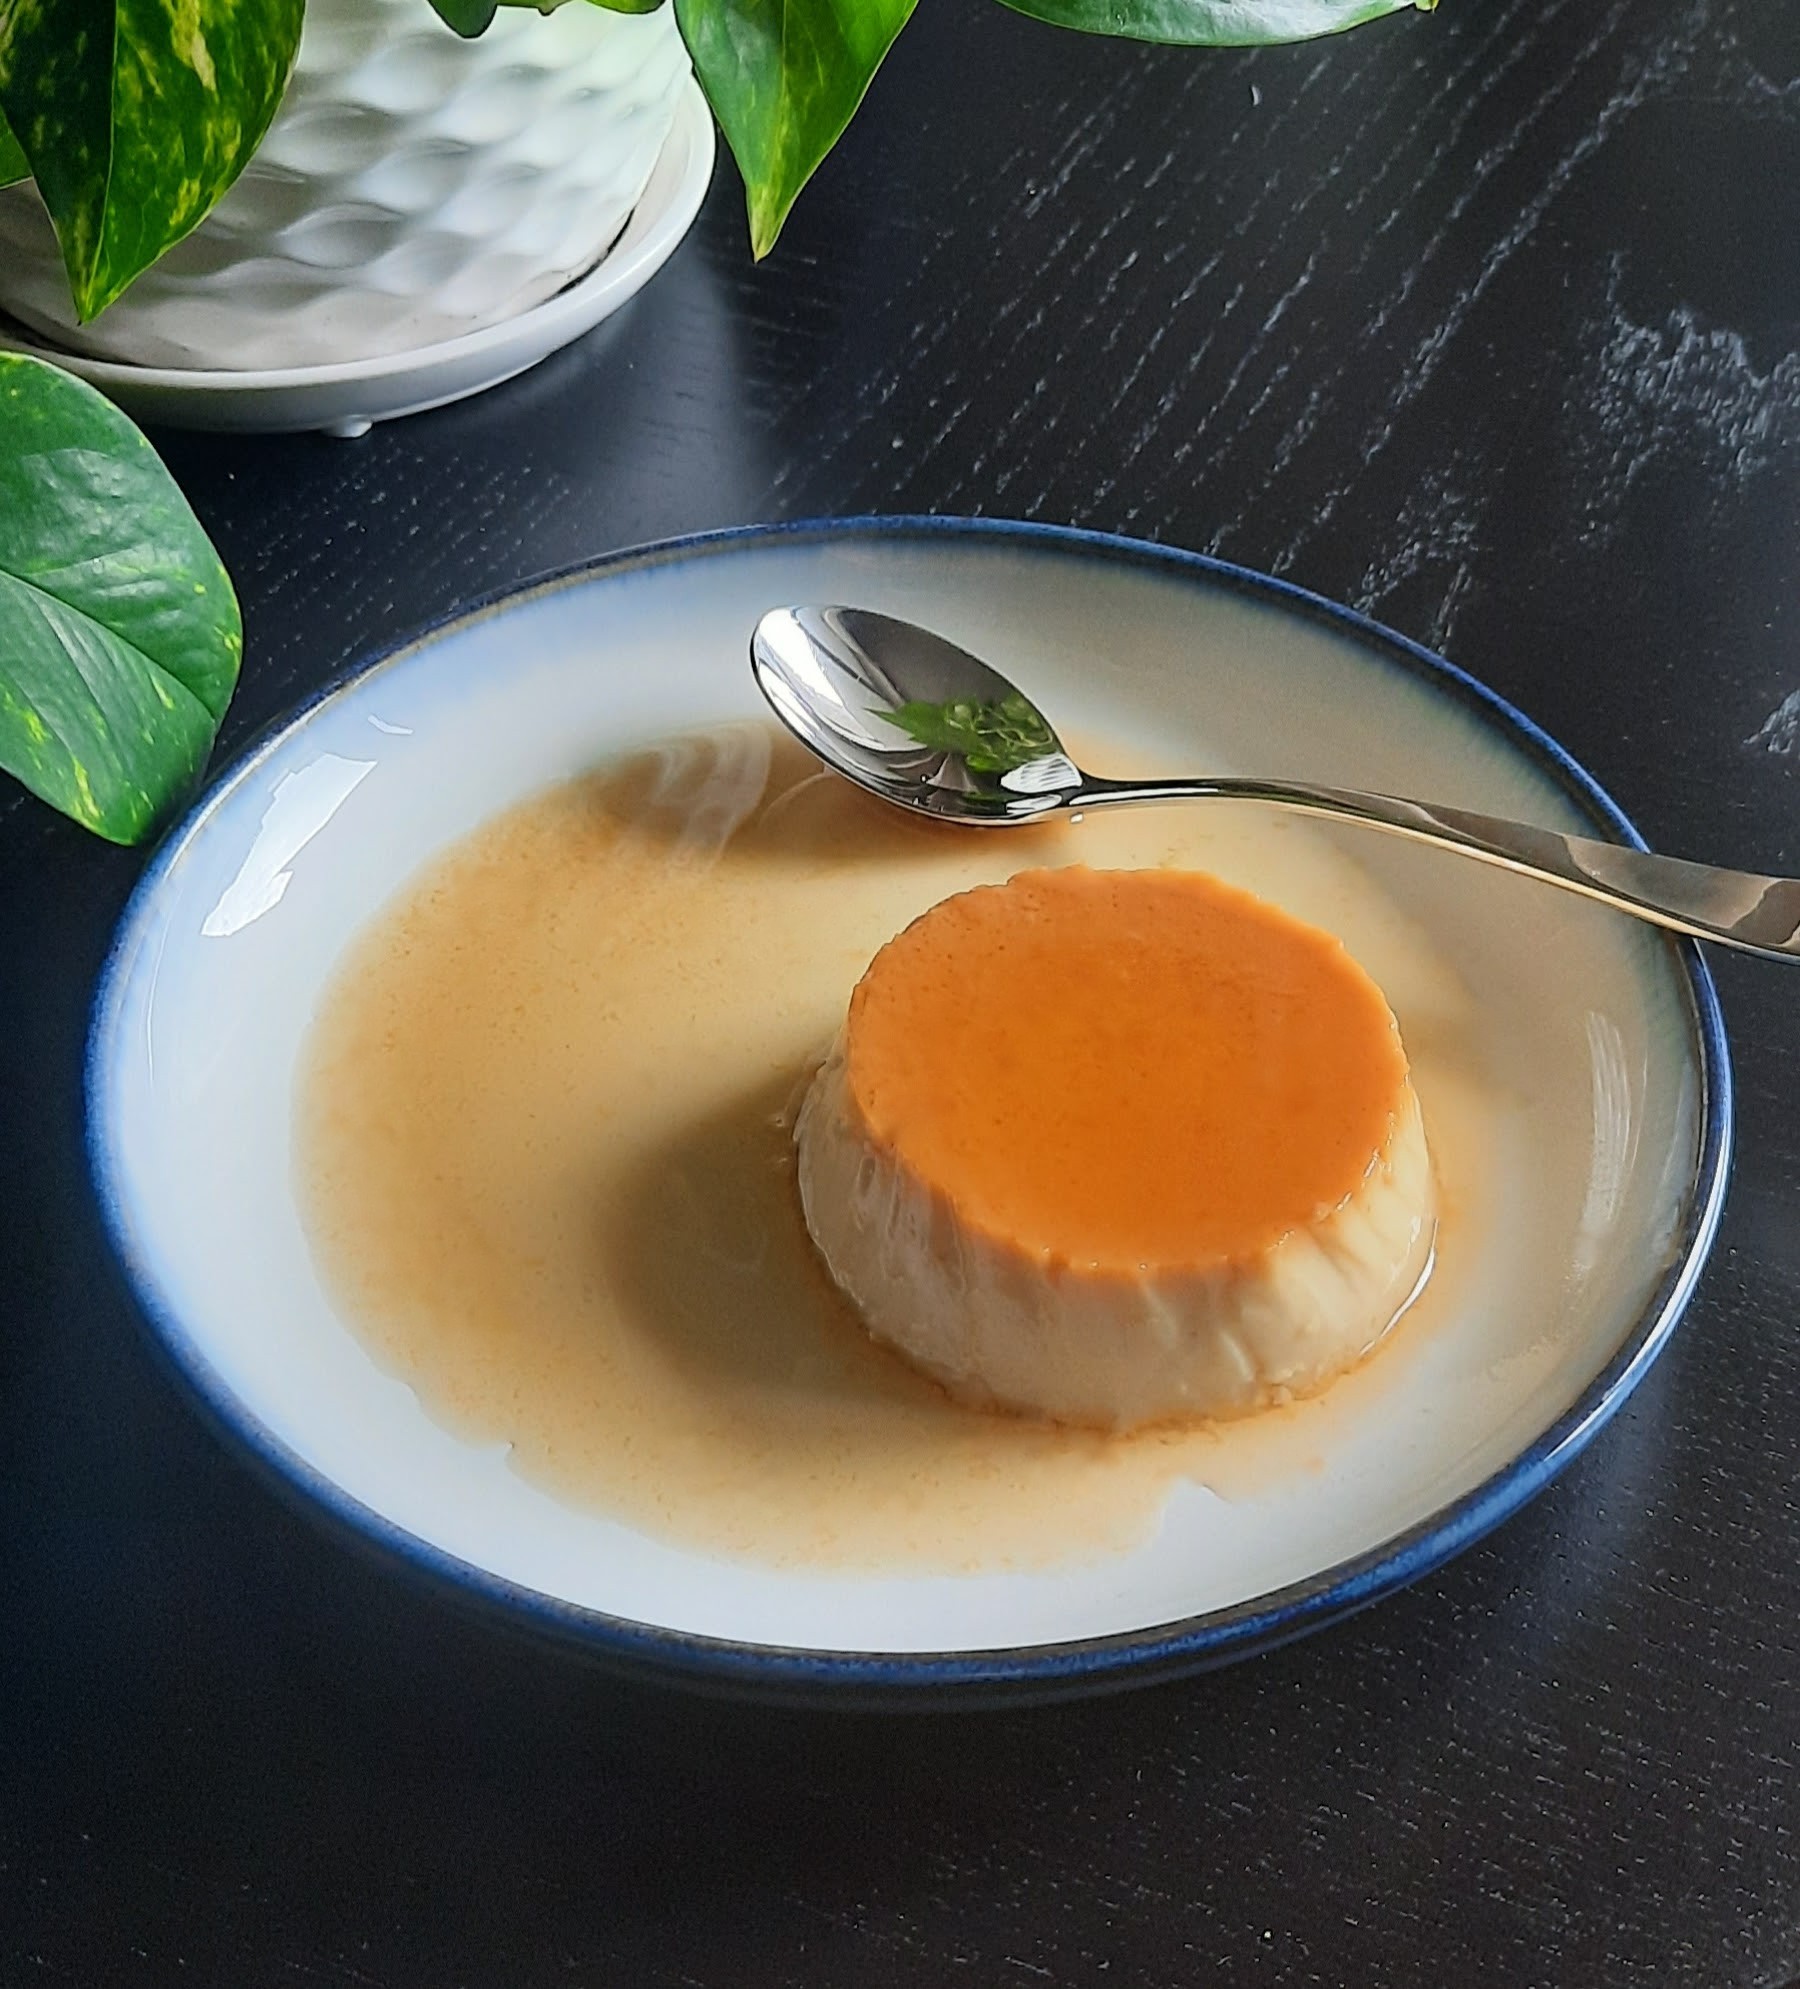 A Crme Caramel experience project by Yaymaker